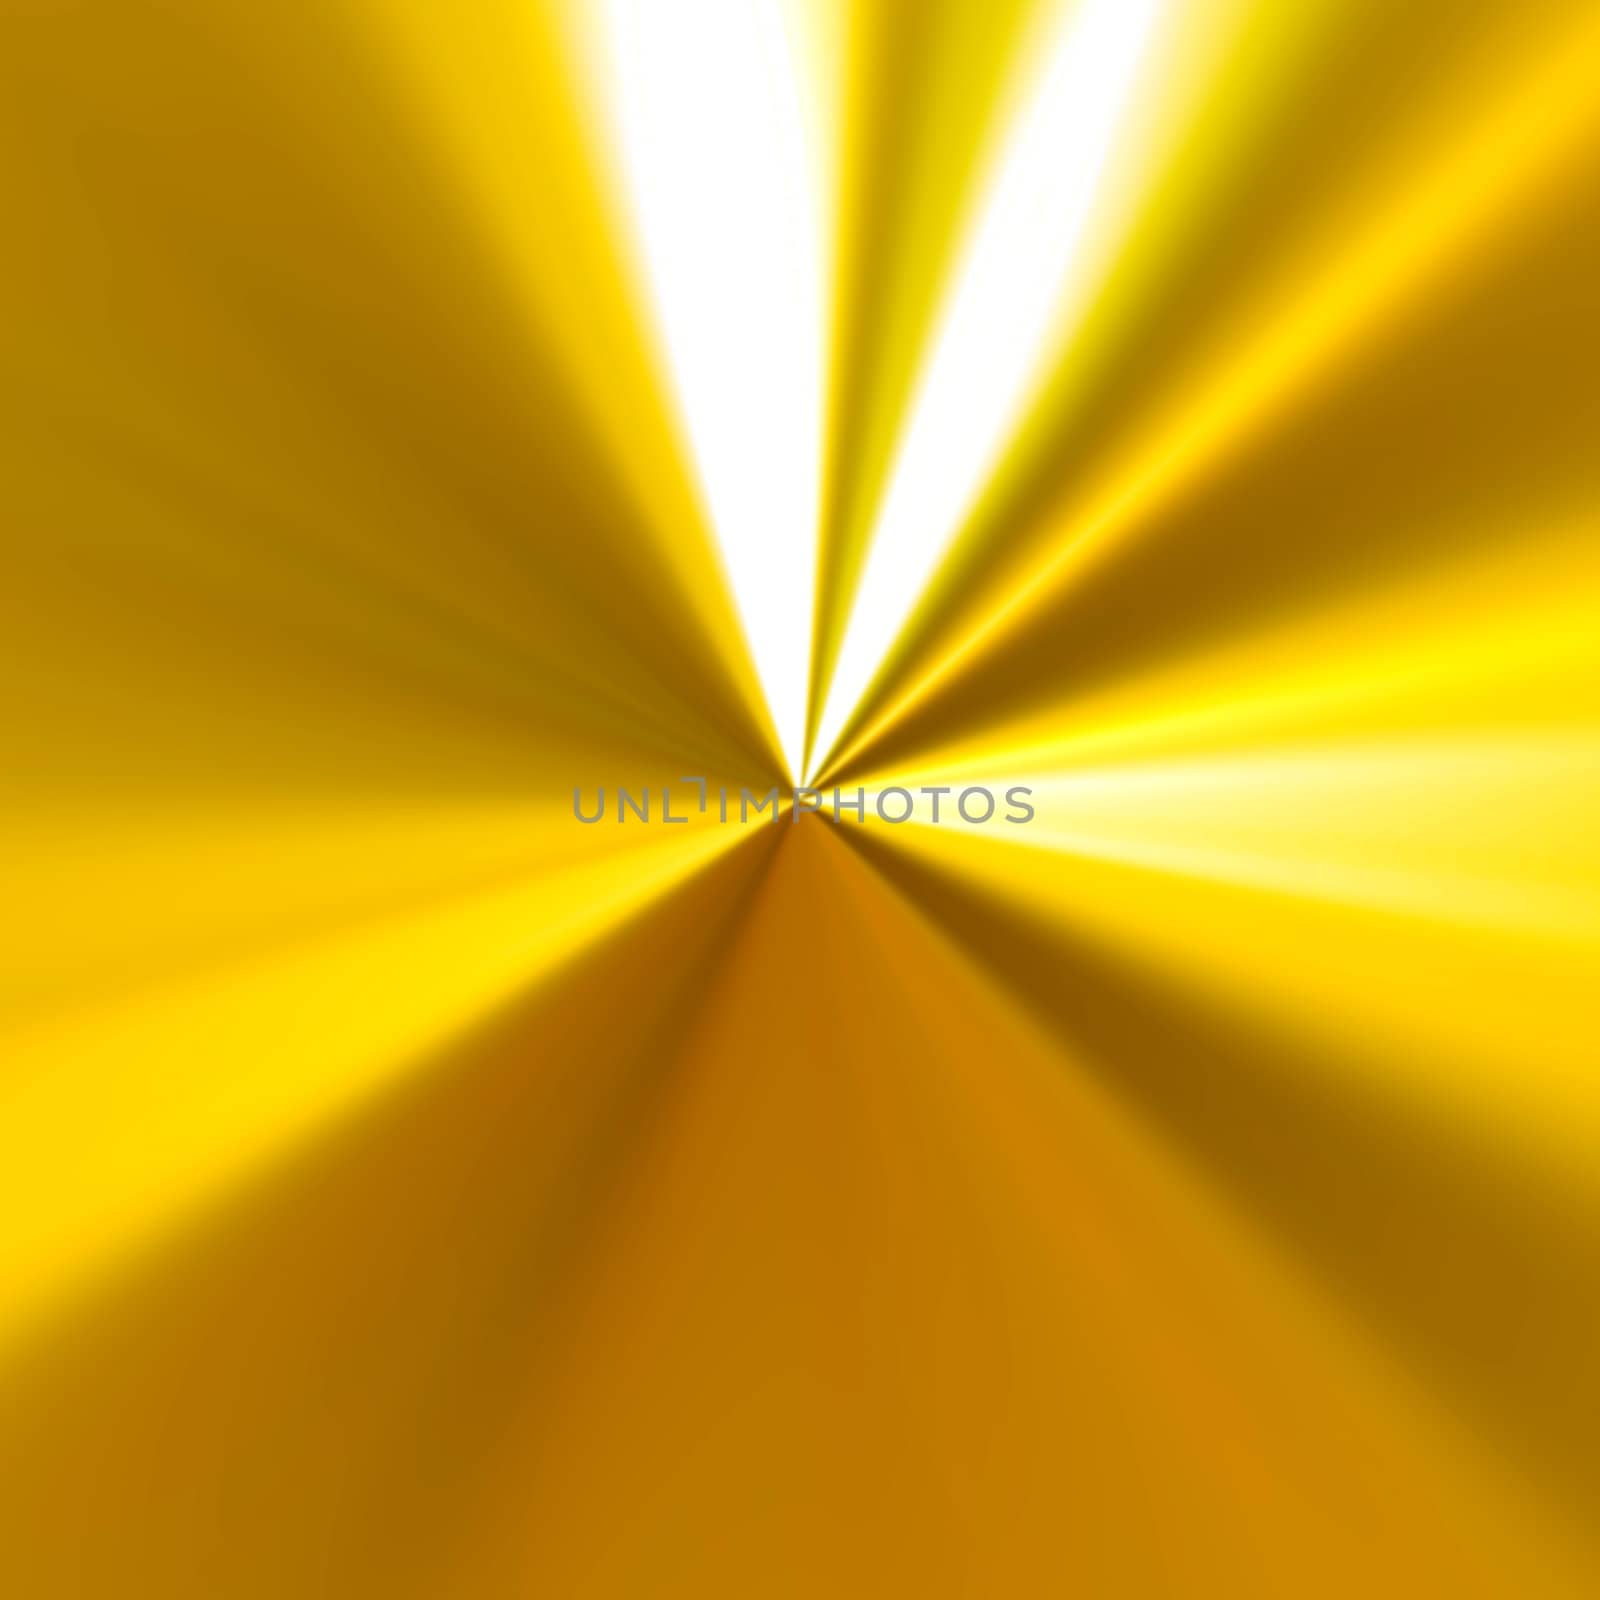 A shiny golden background with radial highlights.